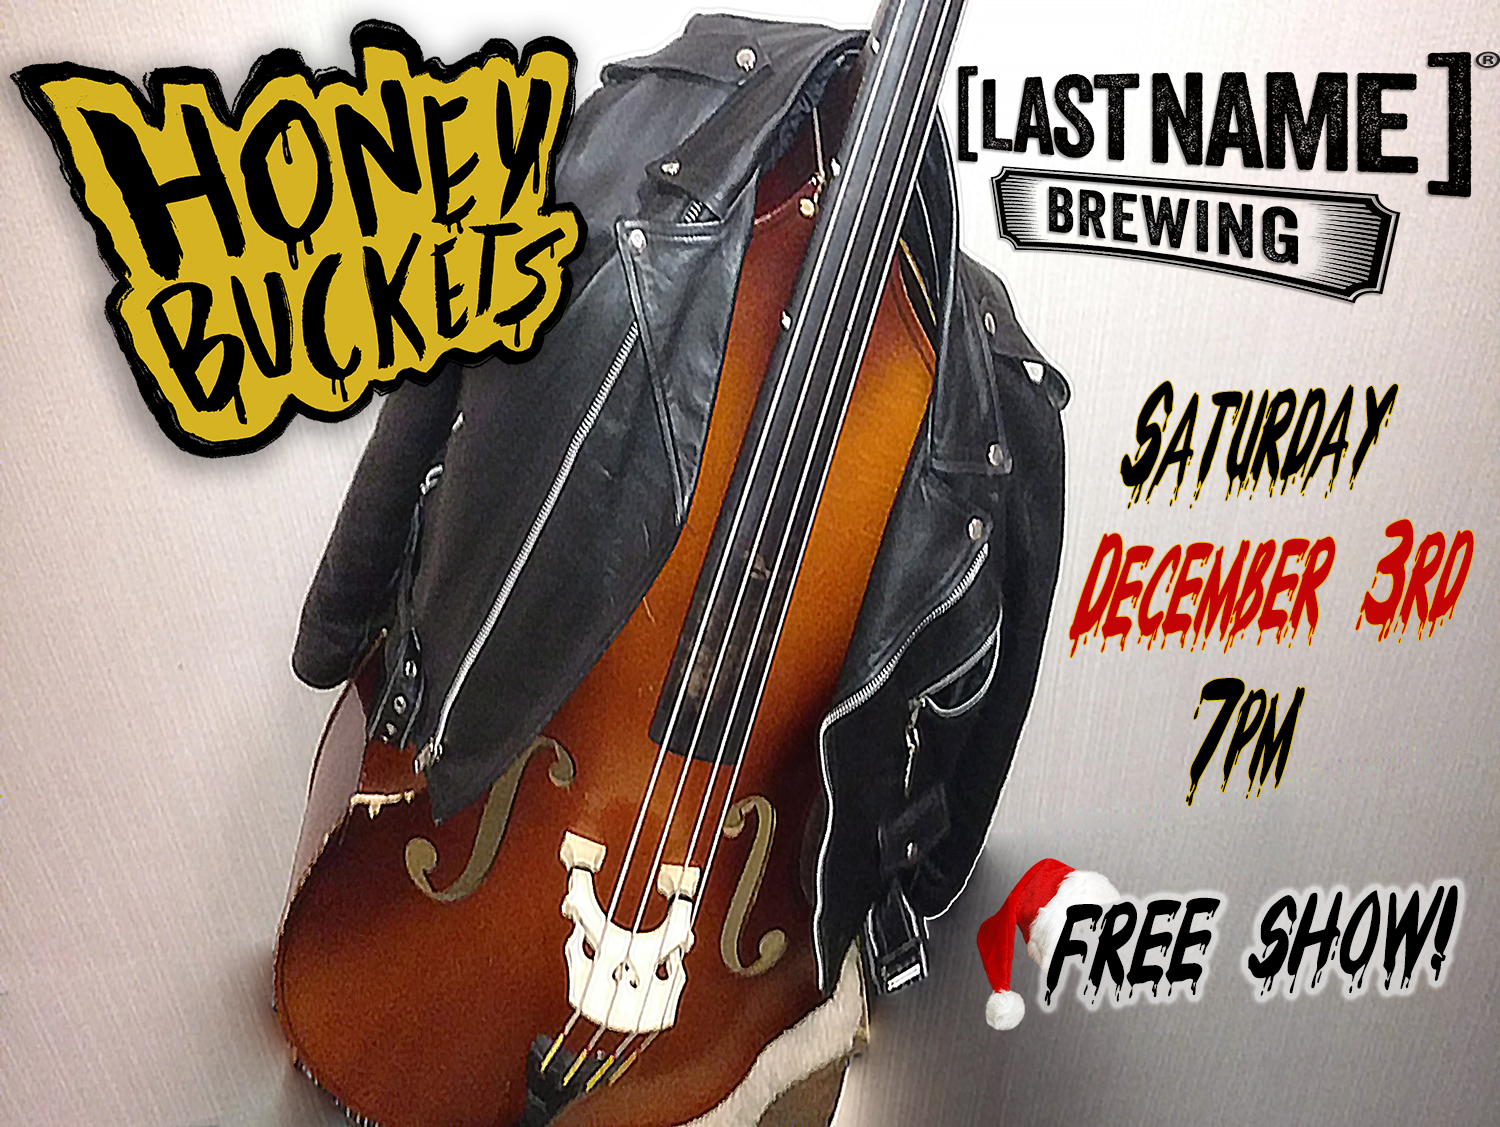 Honey Buckets Bluegrass Band @ Last Name Brewing, Upland, CA, Saturday Dec 3rd, 7pm